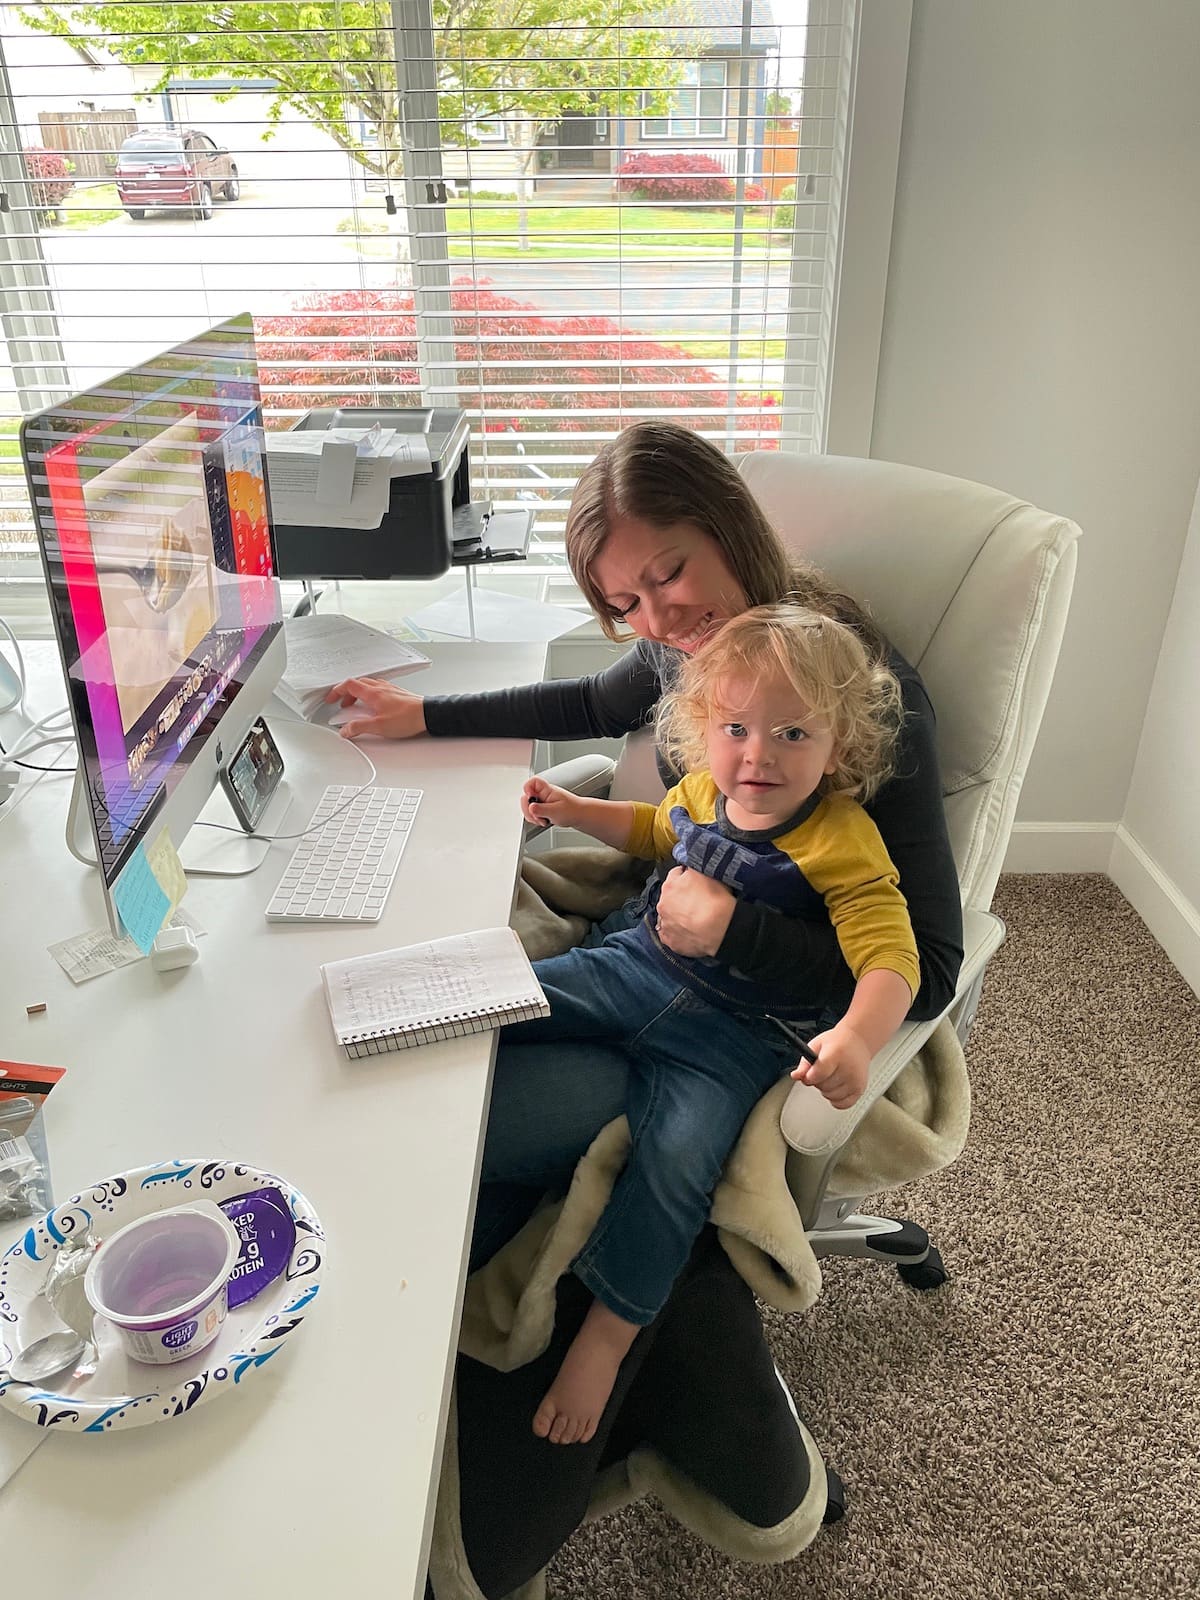 mom with baby on lap in office